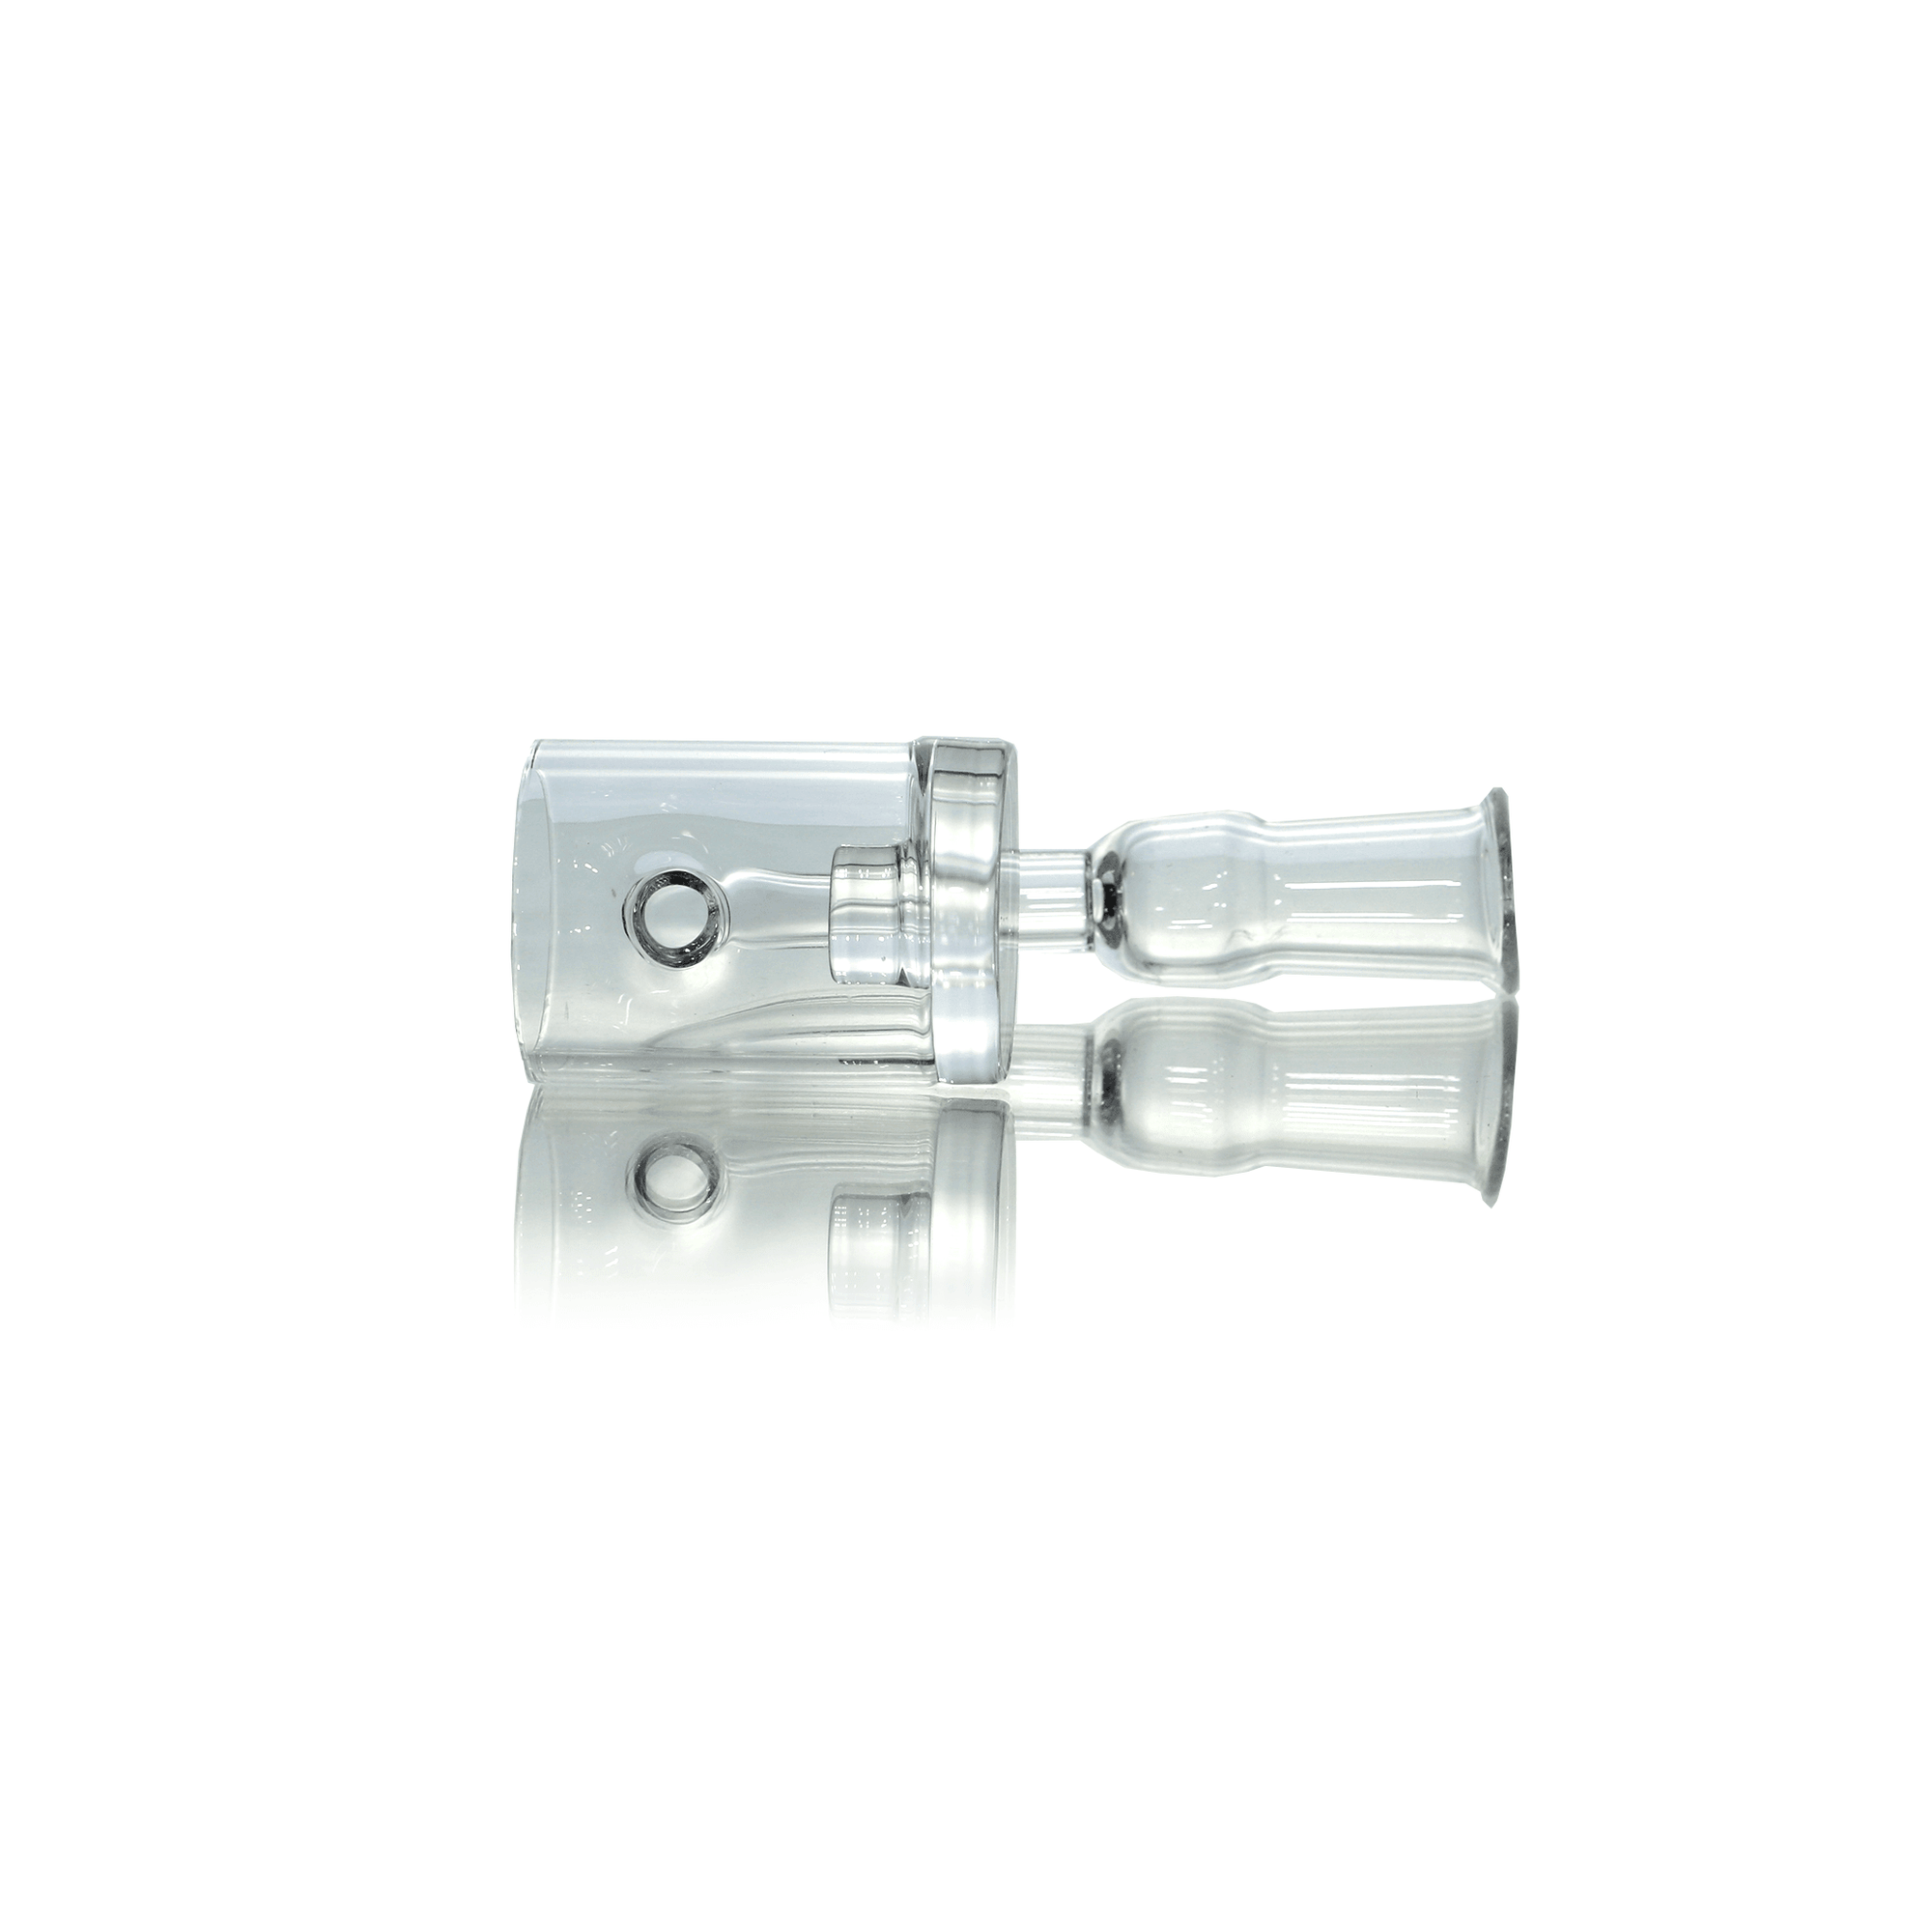 Quartz Banger Core Reactor 10mm Female With Saucer Cap | Banger Prone View | the dabbing specialists